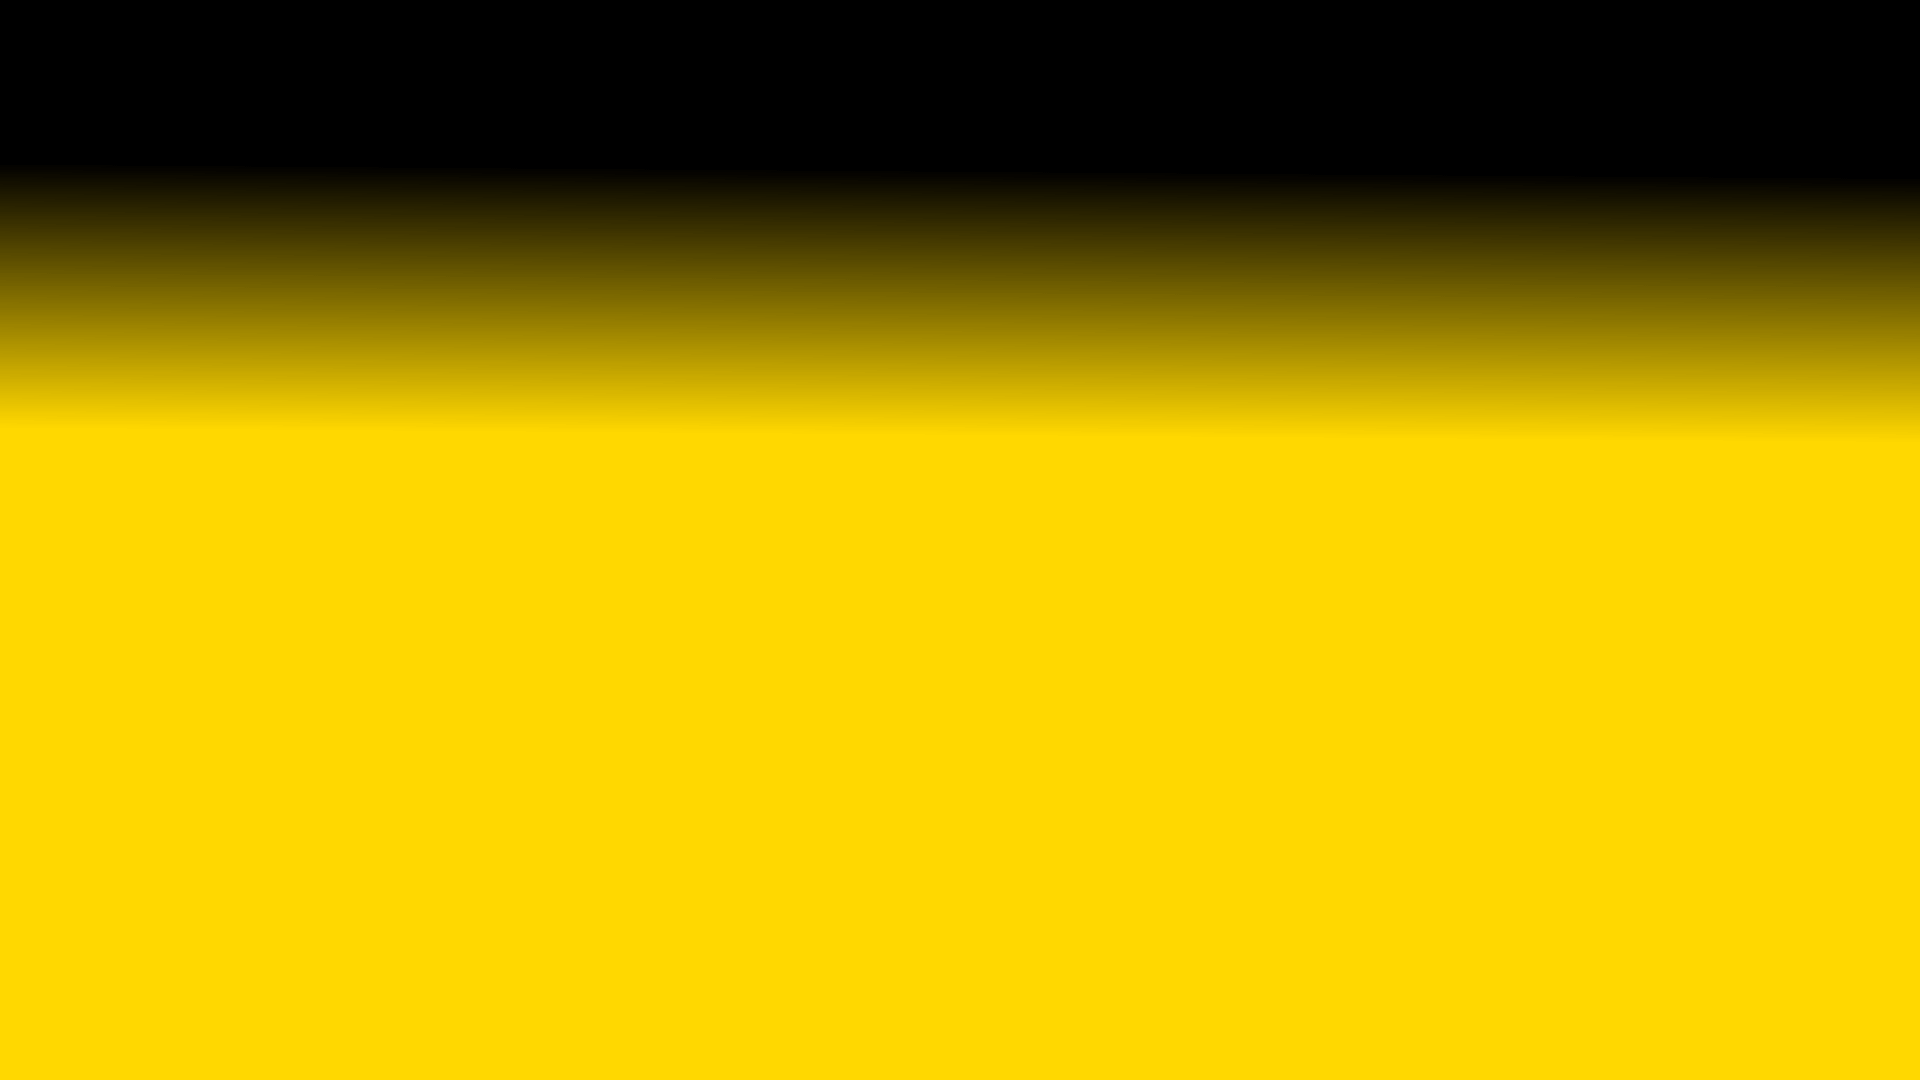 1920x1080 Black and Yellow Gradient